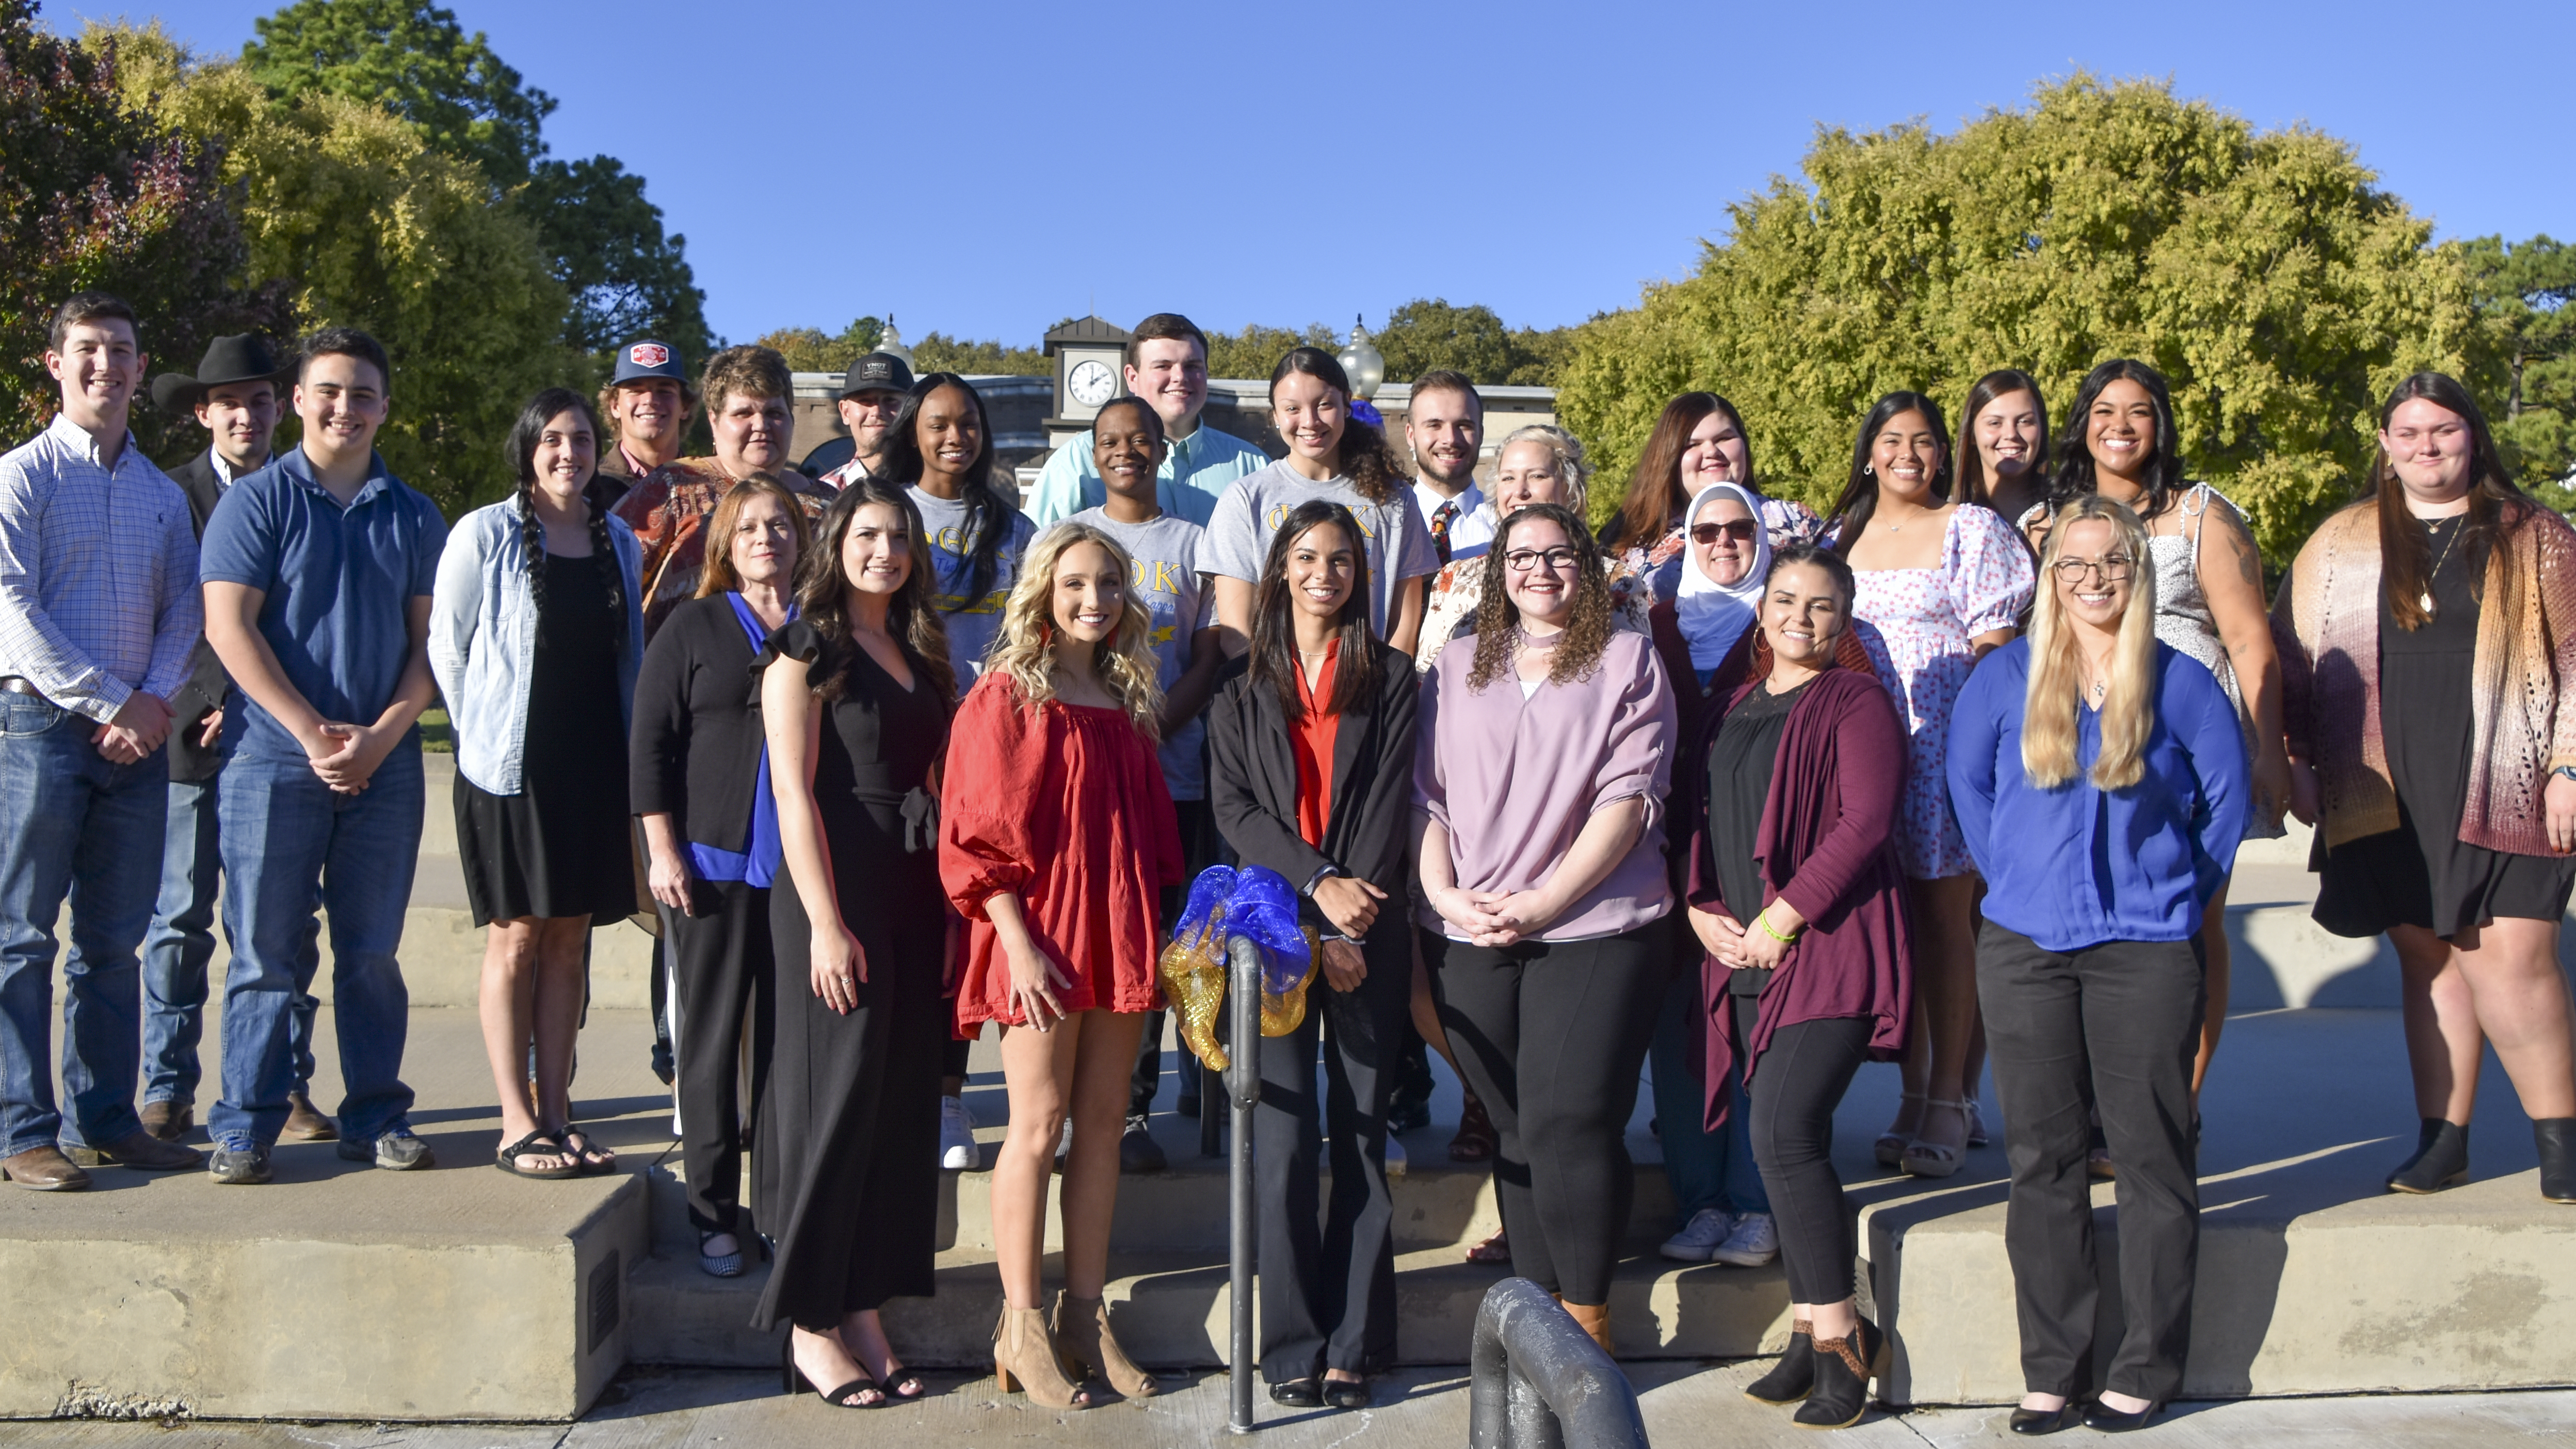 Eastern inducts students into national honor society, Phi Theta Kappa